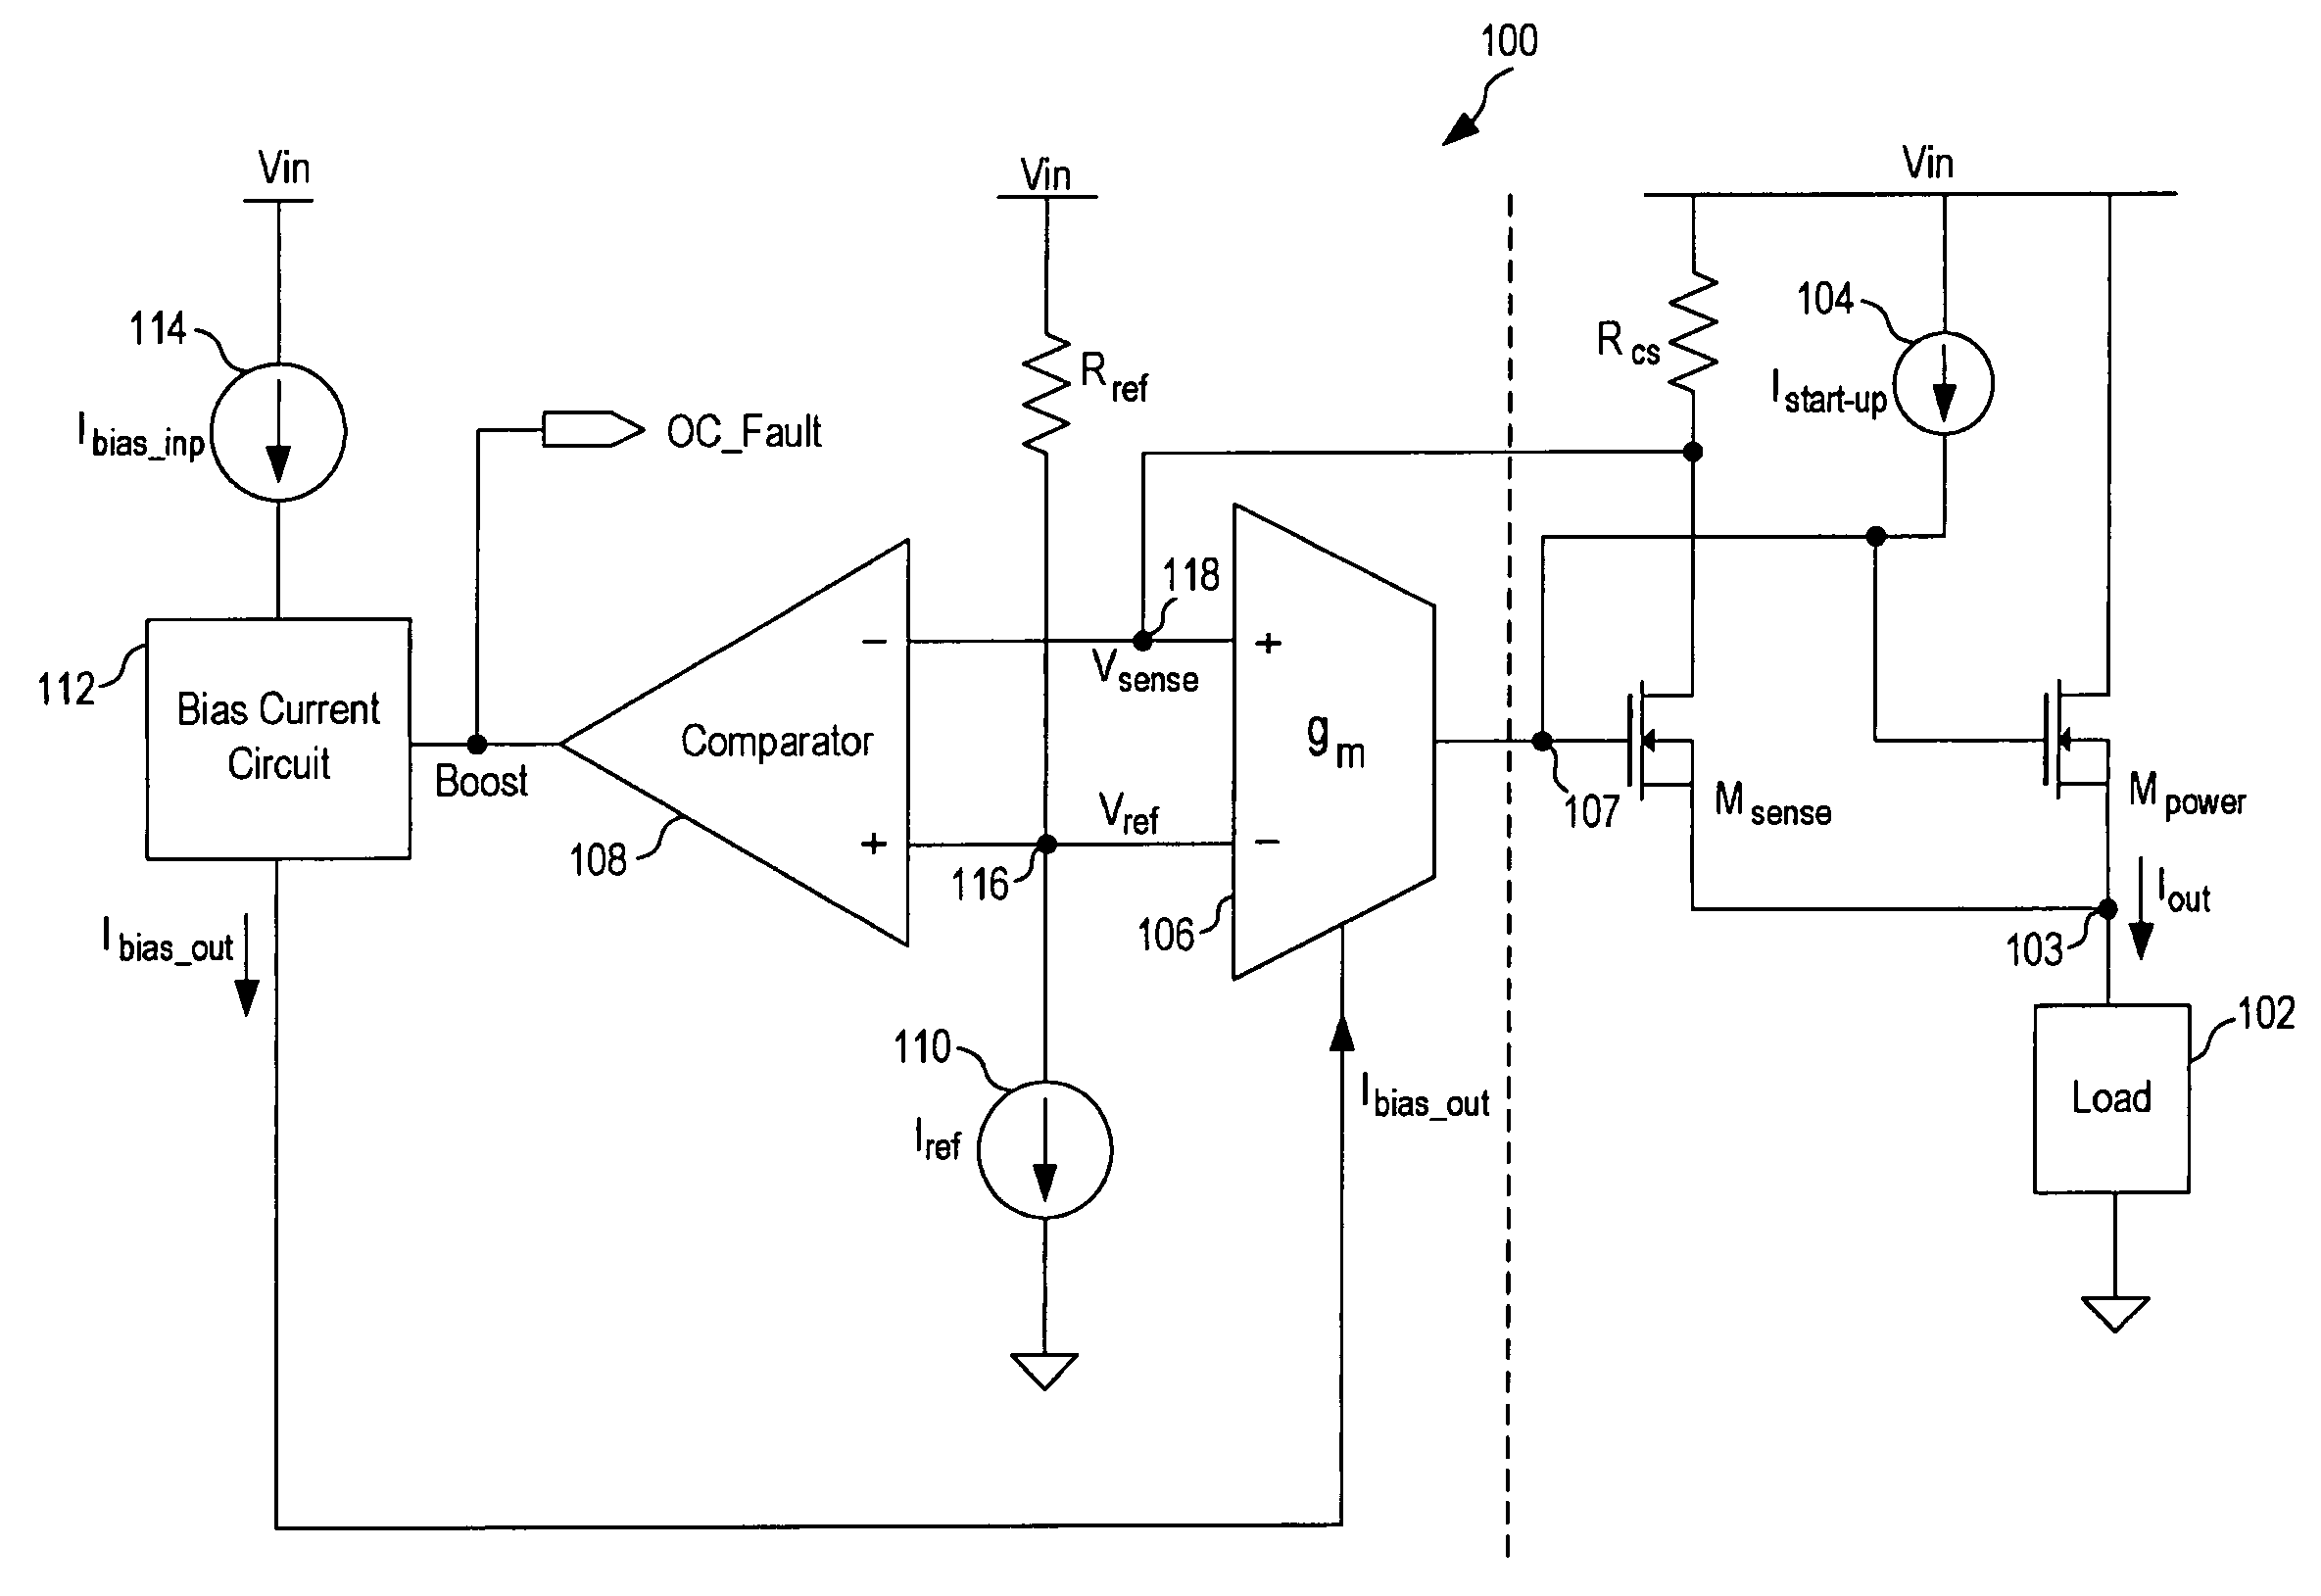 Overcurrent protection circuit with fast current limiting control